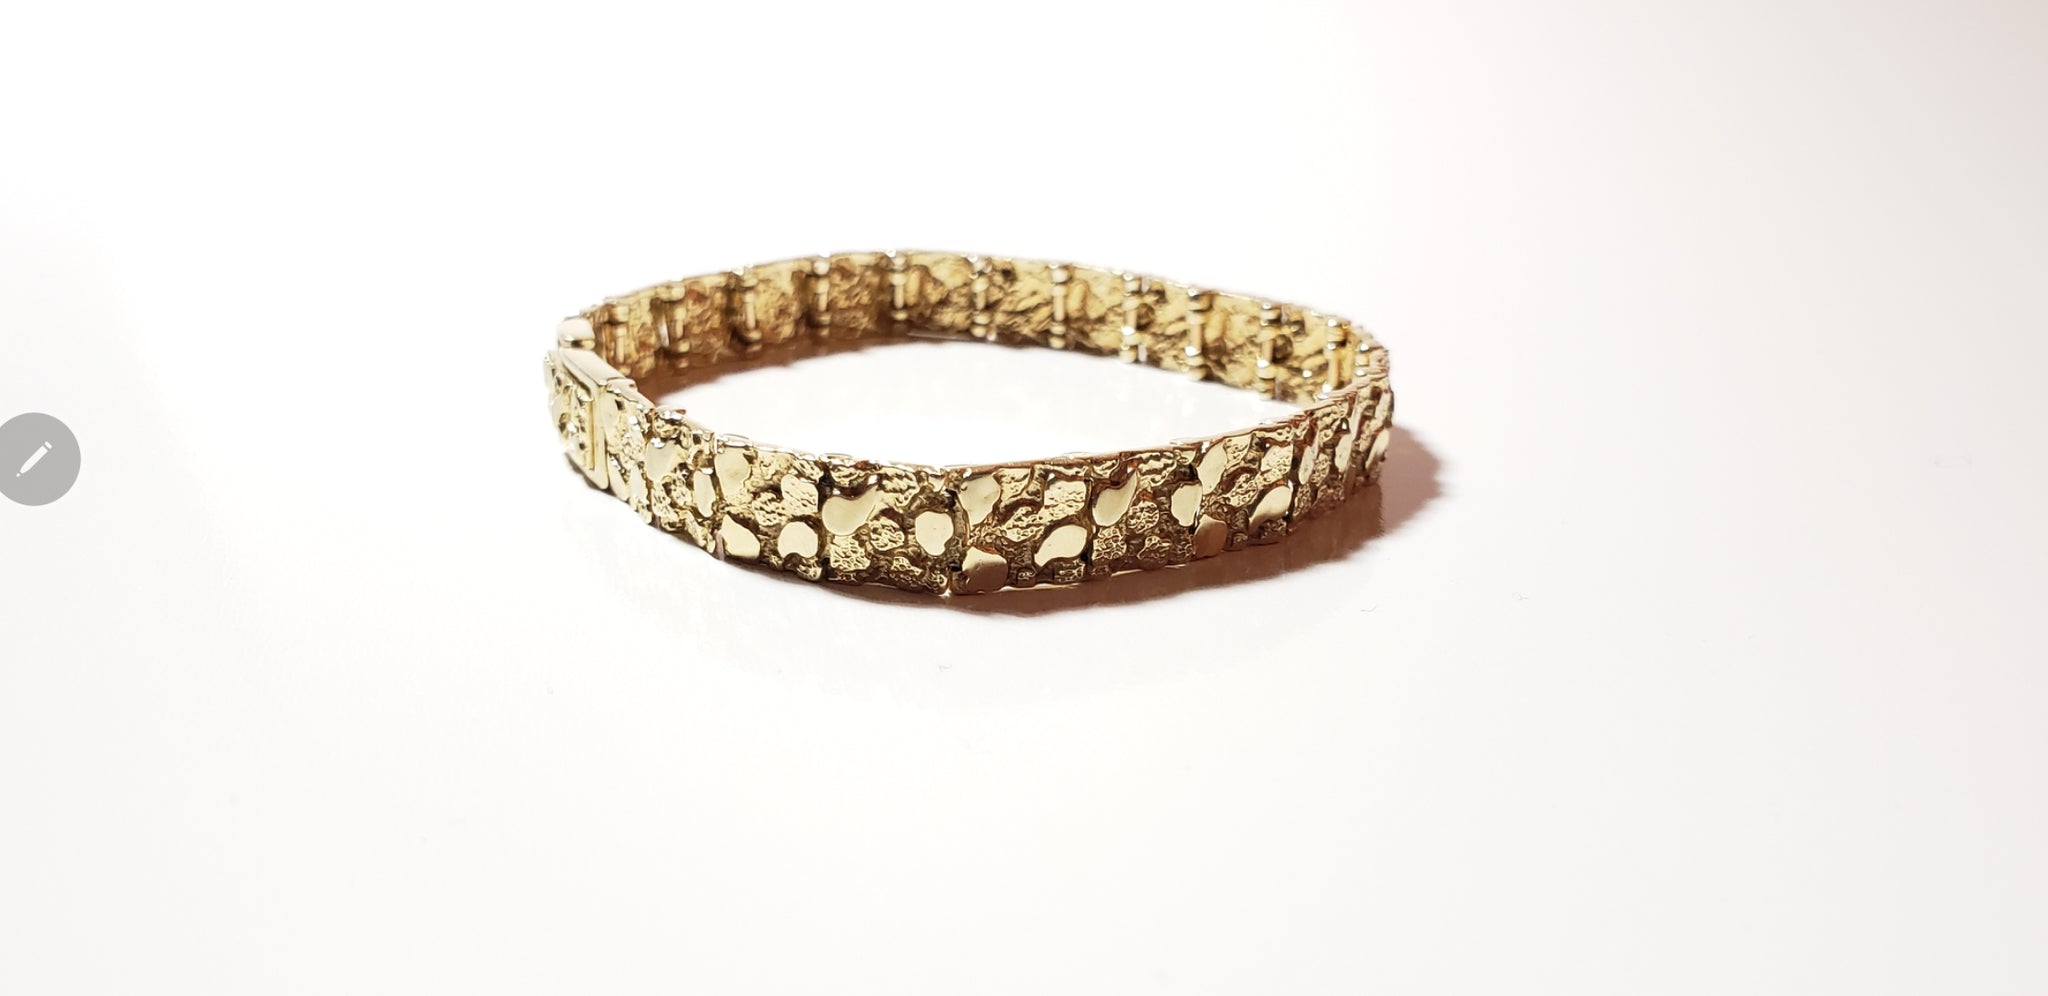 Buy 10k Yellow Gold Large Nugget Bracelet Online at SO ICY JEWELRY